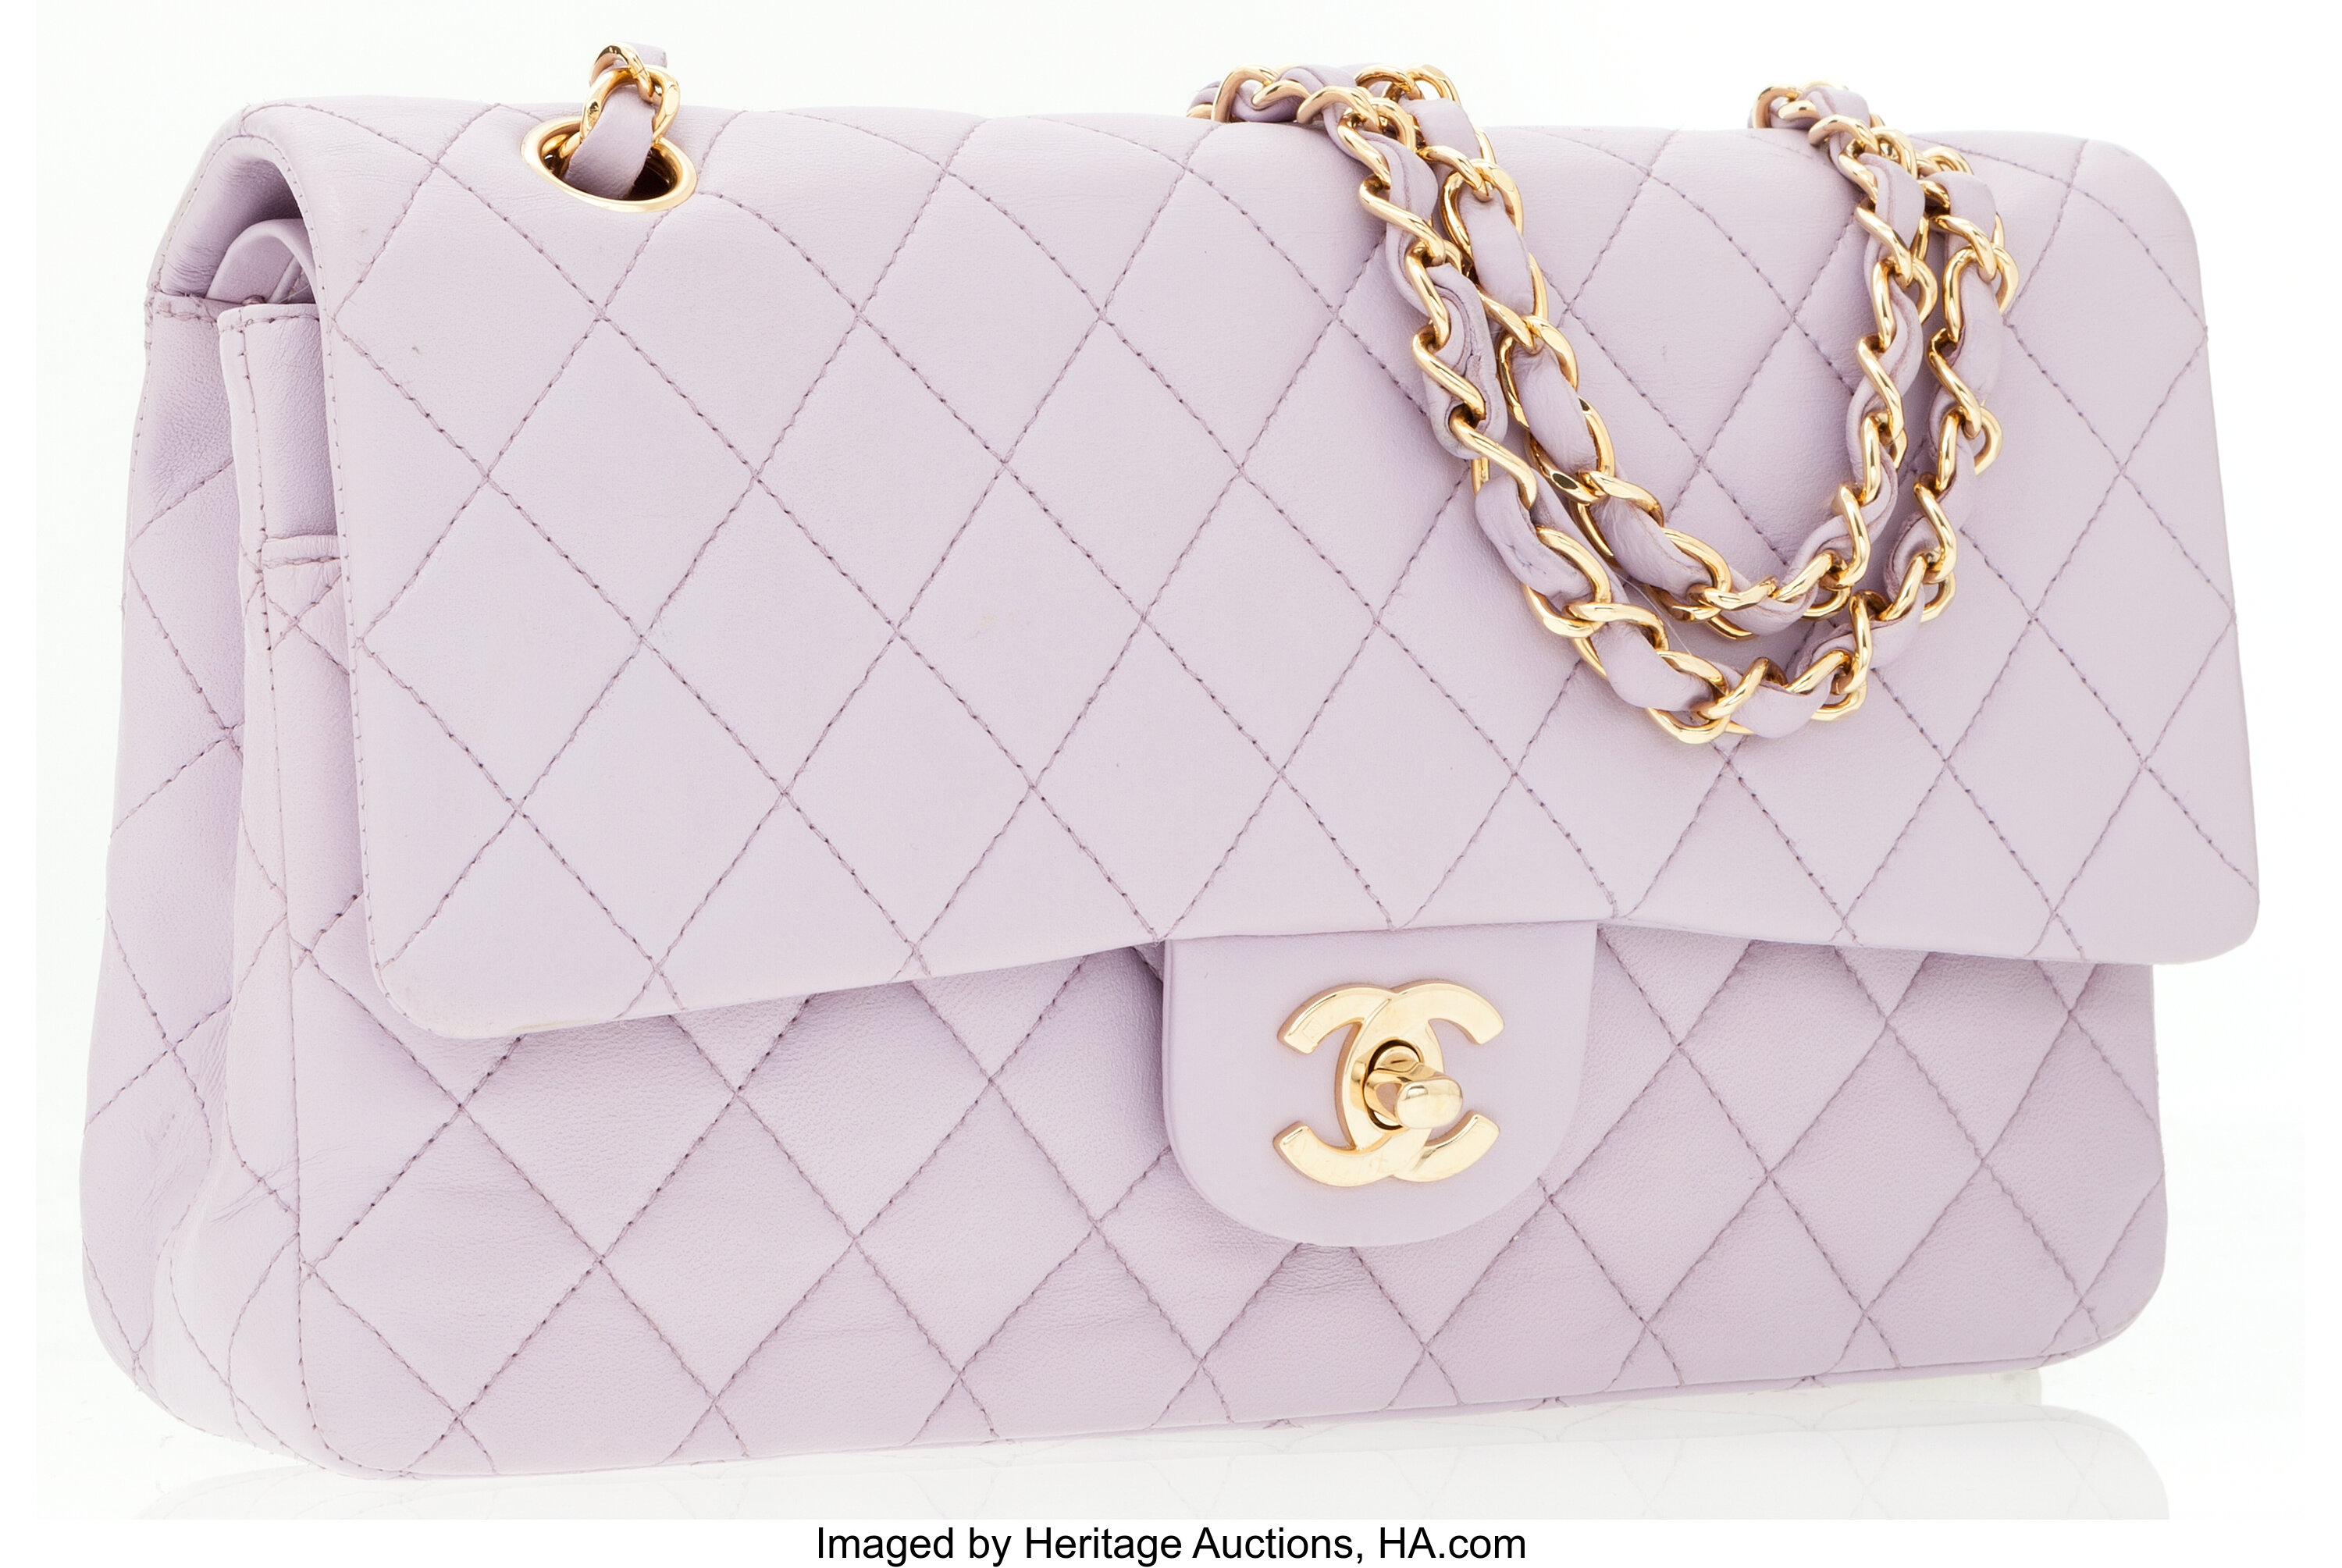 Chanel Lilac Quilted Lambskin Leather Medium Double Flap Bag with